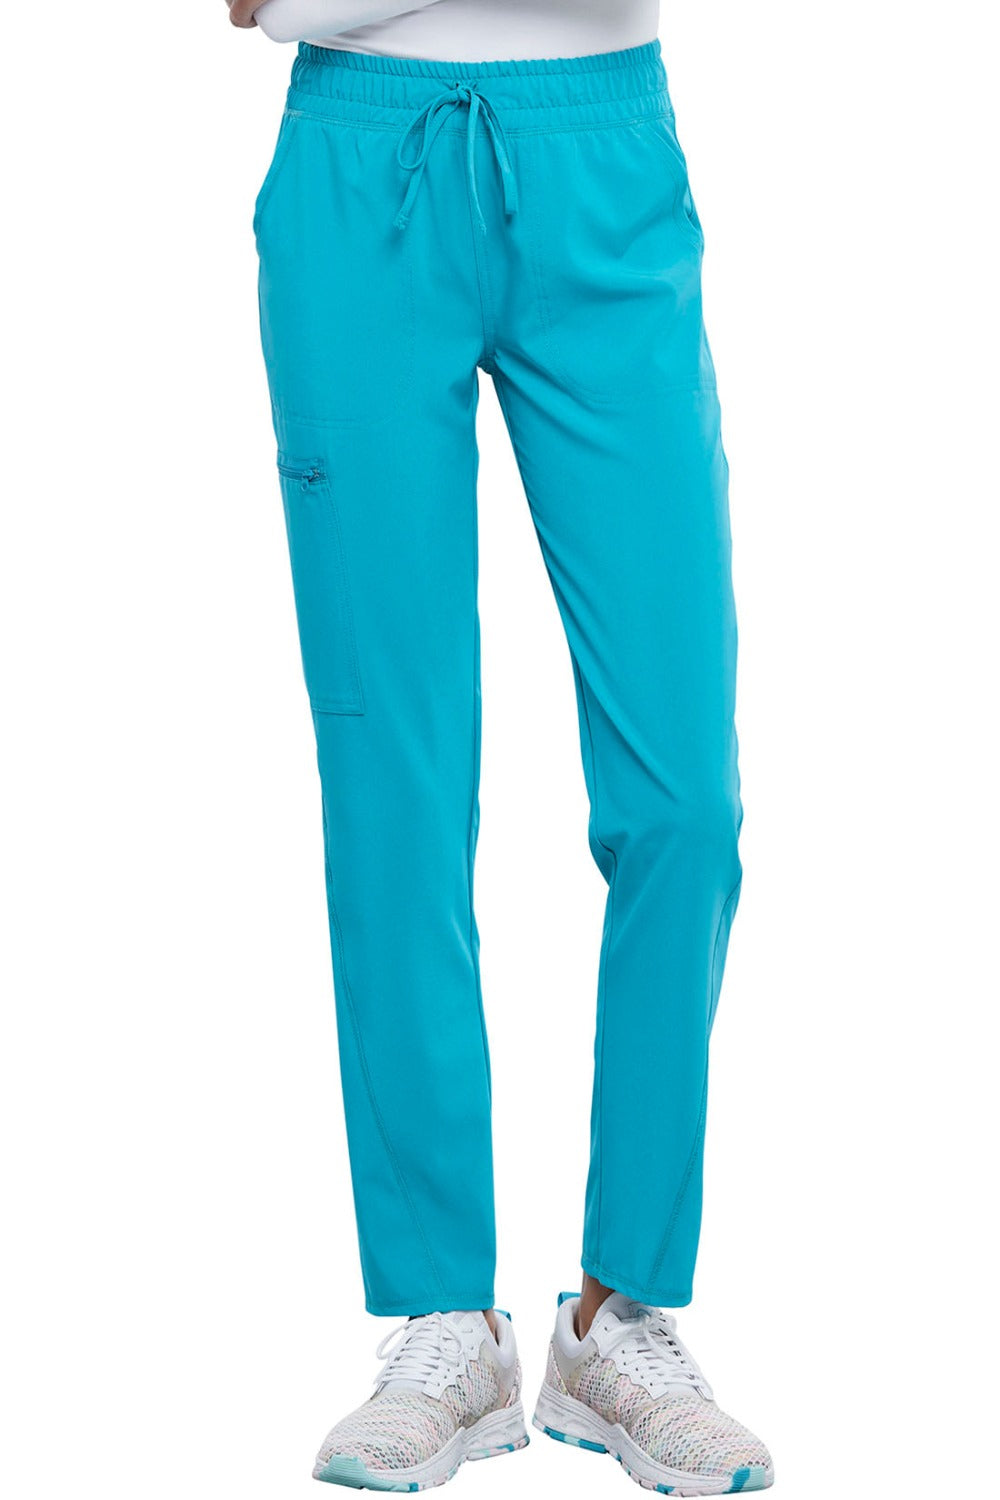 Cherokee Allura Scrub Pant Mid Rise Tapered Leg Drawstring in Teal Blue at Parker's Clothing and Shoes.